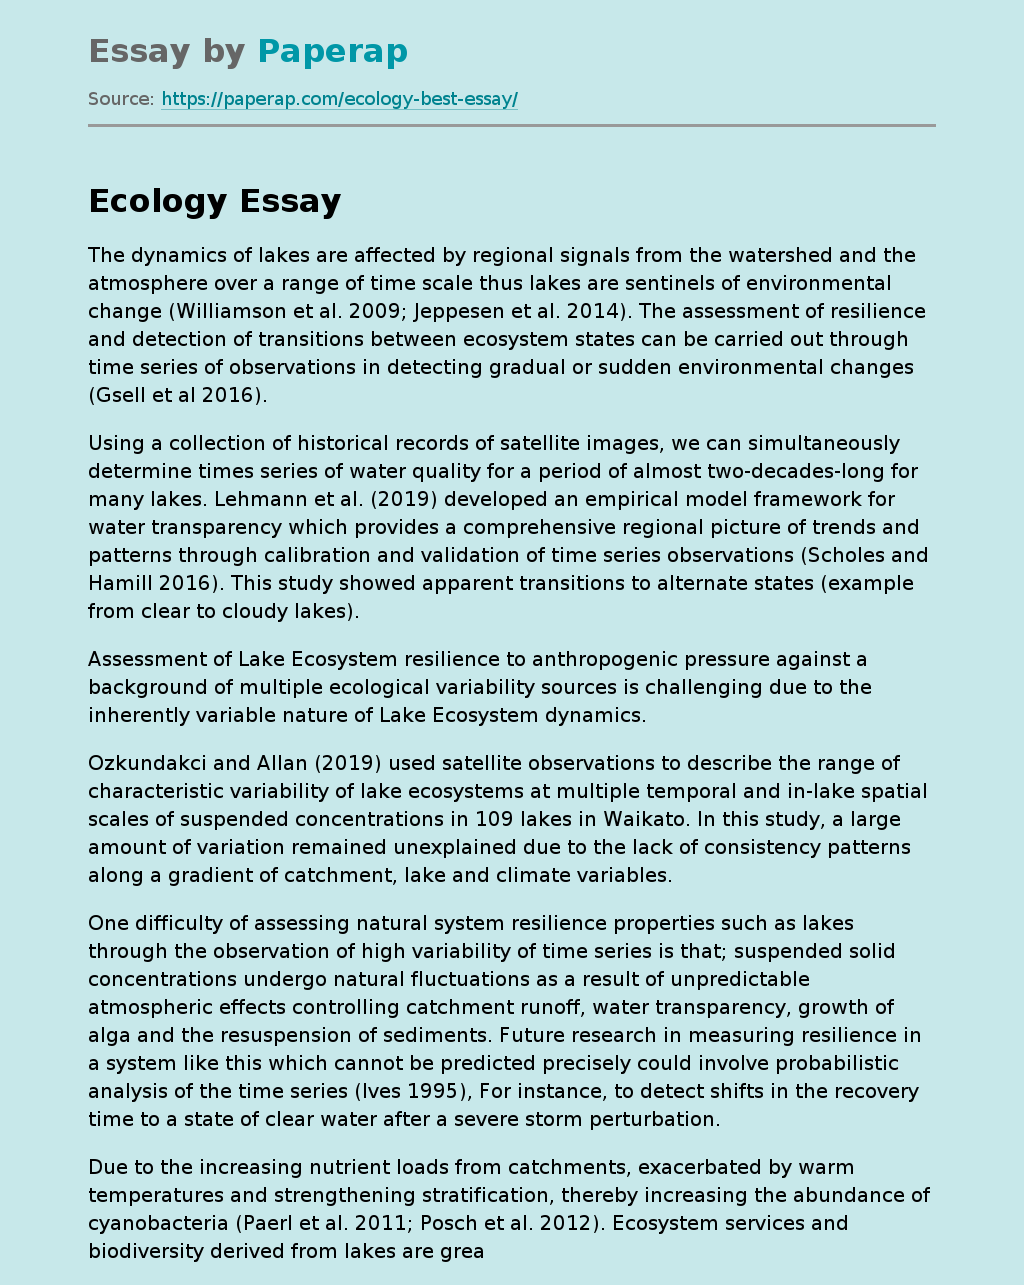 Ecology of Lakes and Ecosystem Transitions